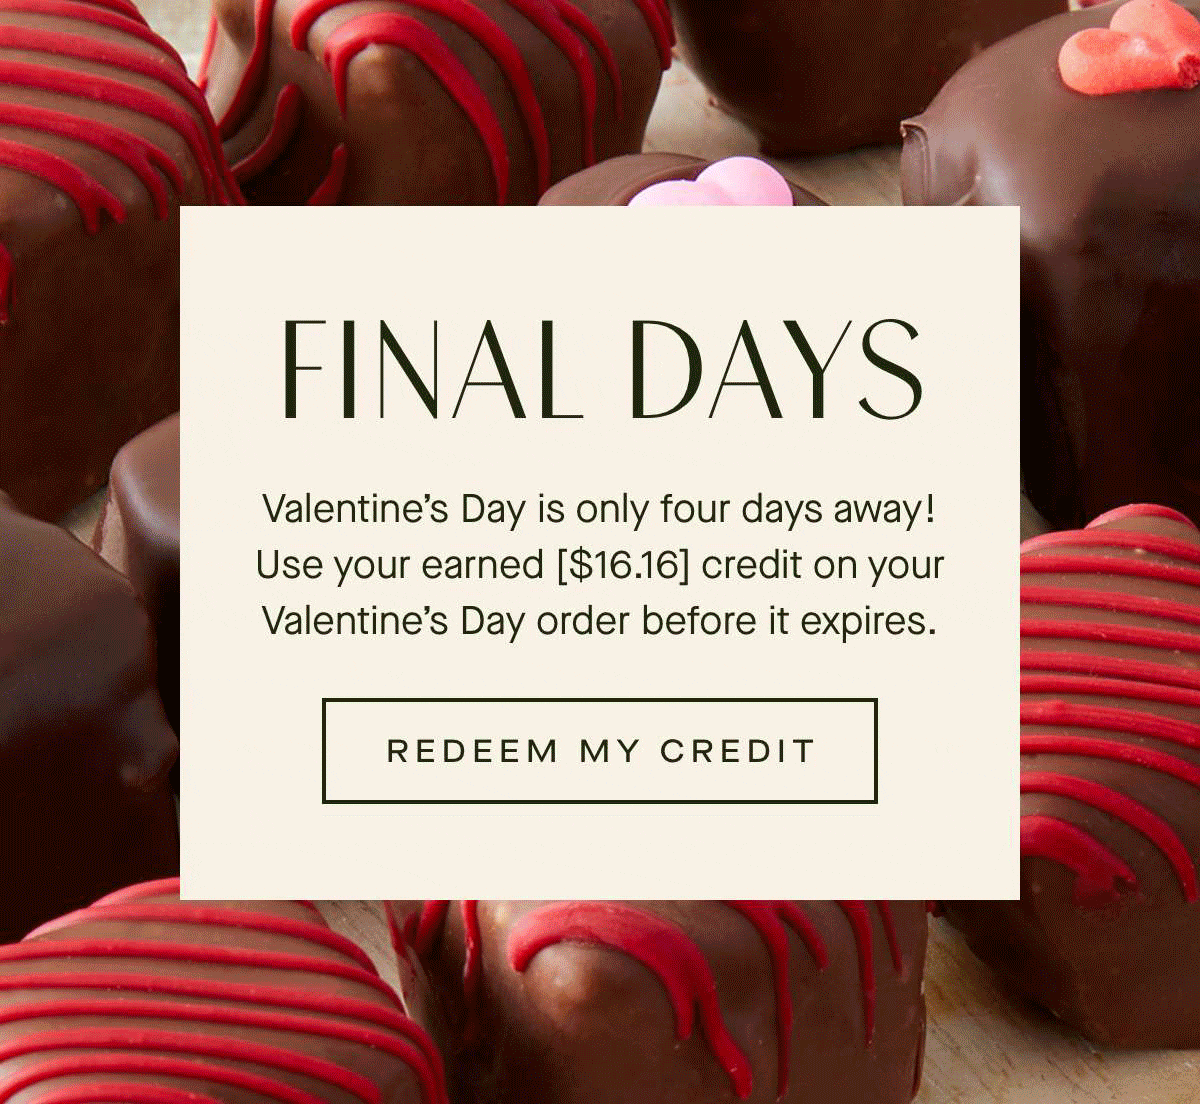 FINAL DAYS - Valentines Day is only four days away! Use your earned [$16.16] credit on your Valentines Day order before it expires. - REDEEM MY CREDIT 